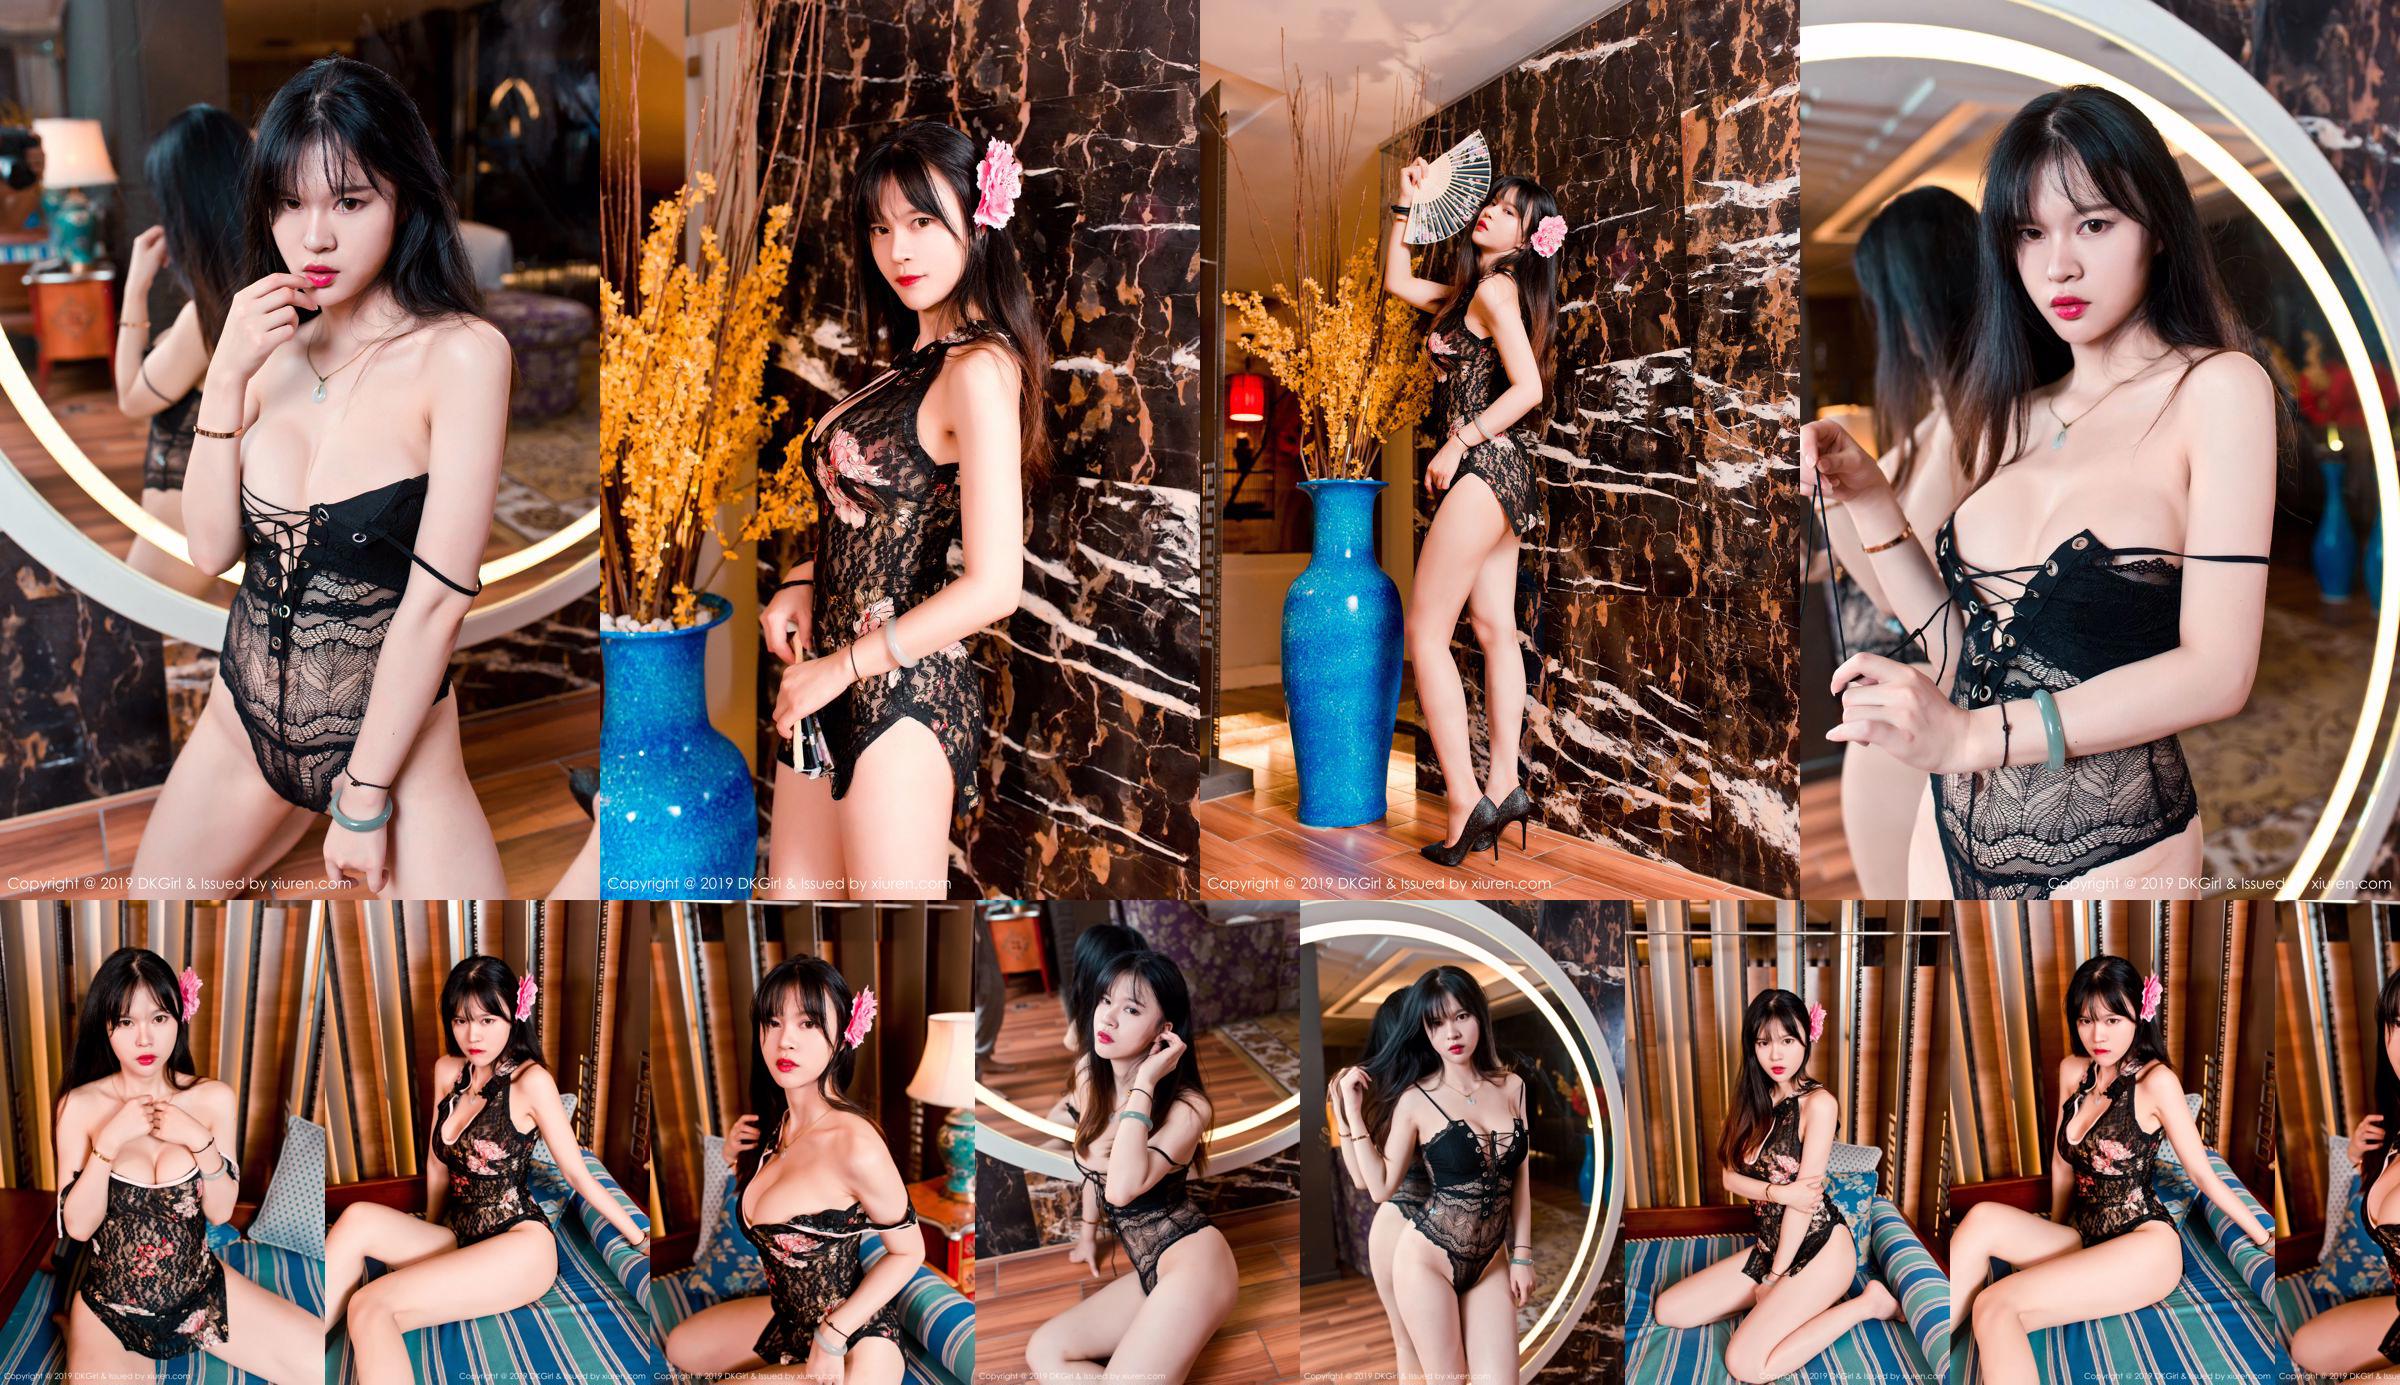 Peach marry "Delicious Hollow Cheongsam and Temptation Lace Underwear" [DKGirl] Vol.093 No.c82baa Page 4